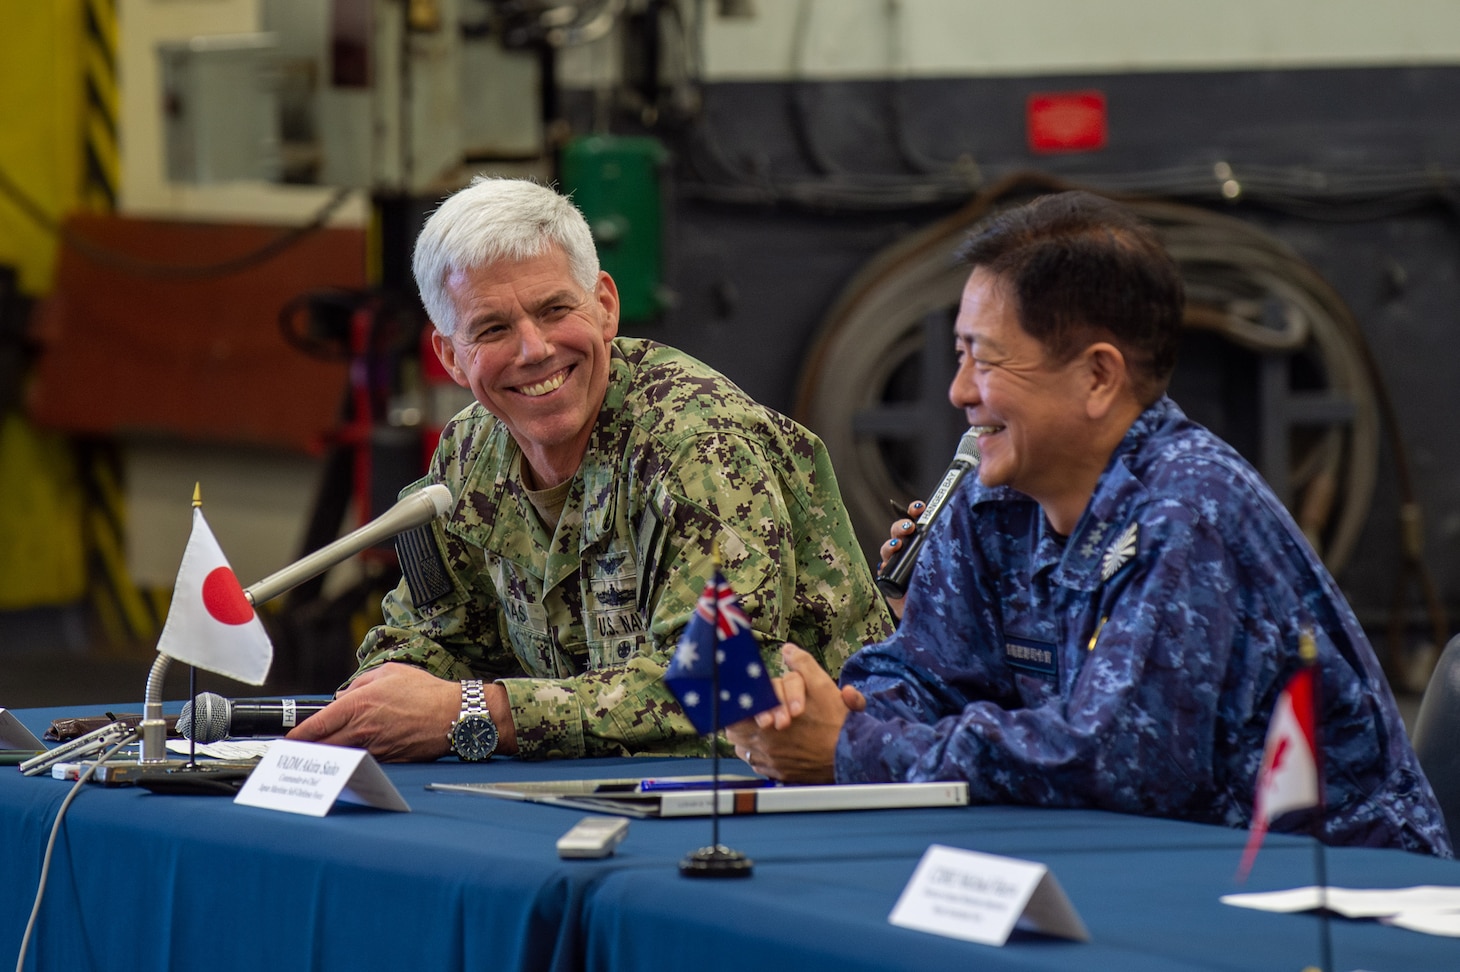 231111-N-GR586-1333 PACIFIC OCEAN (Nov. 11, 2023) Vice Adm. Akira Saito, right, Commander-in-Chief, Self-Defense Fleet, Japan Maritime Self-Defense Force (JMSDF), and Vice Adm. Karl Thomas, Commander, U.S. 7th Fleet, conduct a multilateral press conference aboard Nimitz-class aircraft carrier USS Carl Vinson (CVN 70) as part of Annual Exercise (ANNUALEX) 2023. ANNUALEX is a multilateral exercise conducted by naval elements of the Royal Australian, Royal Canadian, JMSDF, and U.S. navies to demonstrate naval interoperability and a joint commitment to a free and open Indo-Pacific. Vinson, flagship of Carrier Strike Group (CSG) ONE, is deployed to the U.S. 7th Fleet area of operations in support of a free and open Indo-Pacific. (U.S. Navy photo by Mass Communication Specialist 2nd Class Benjamin Ringers)